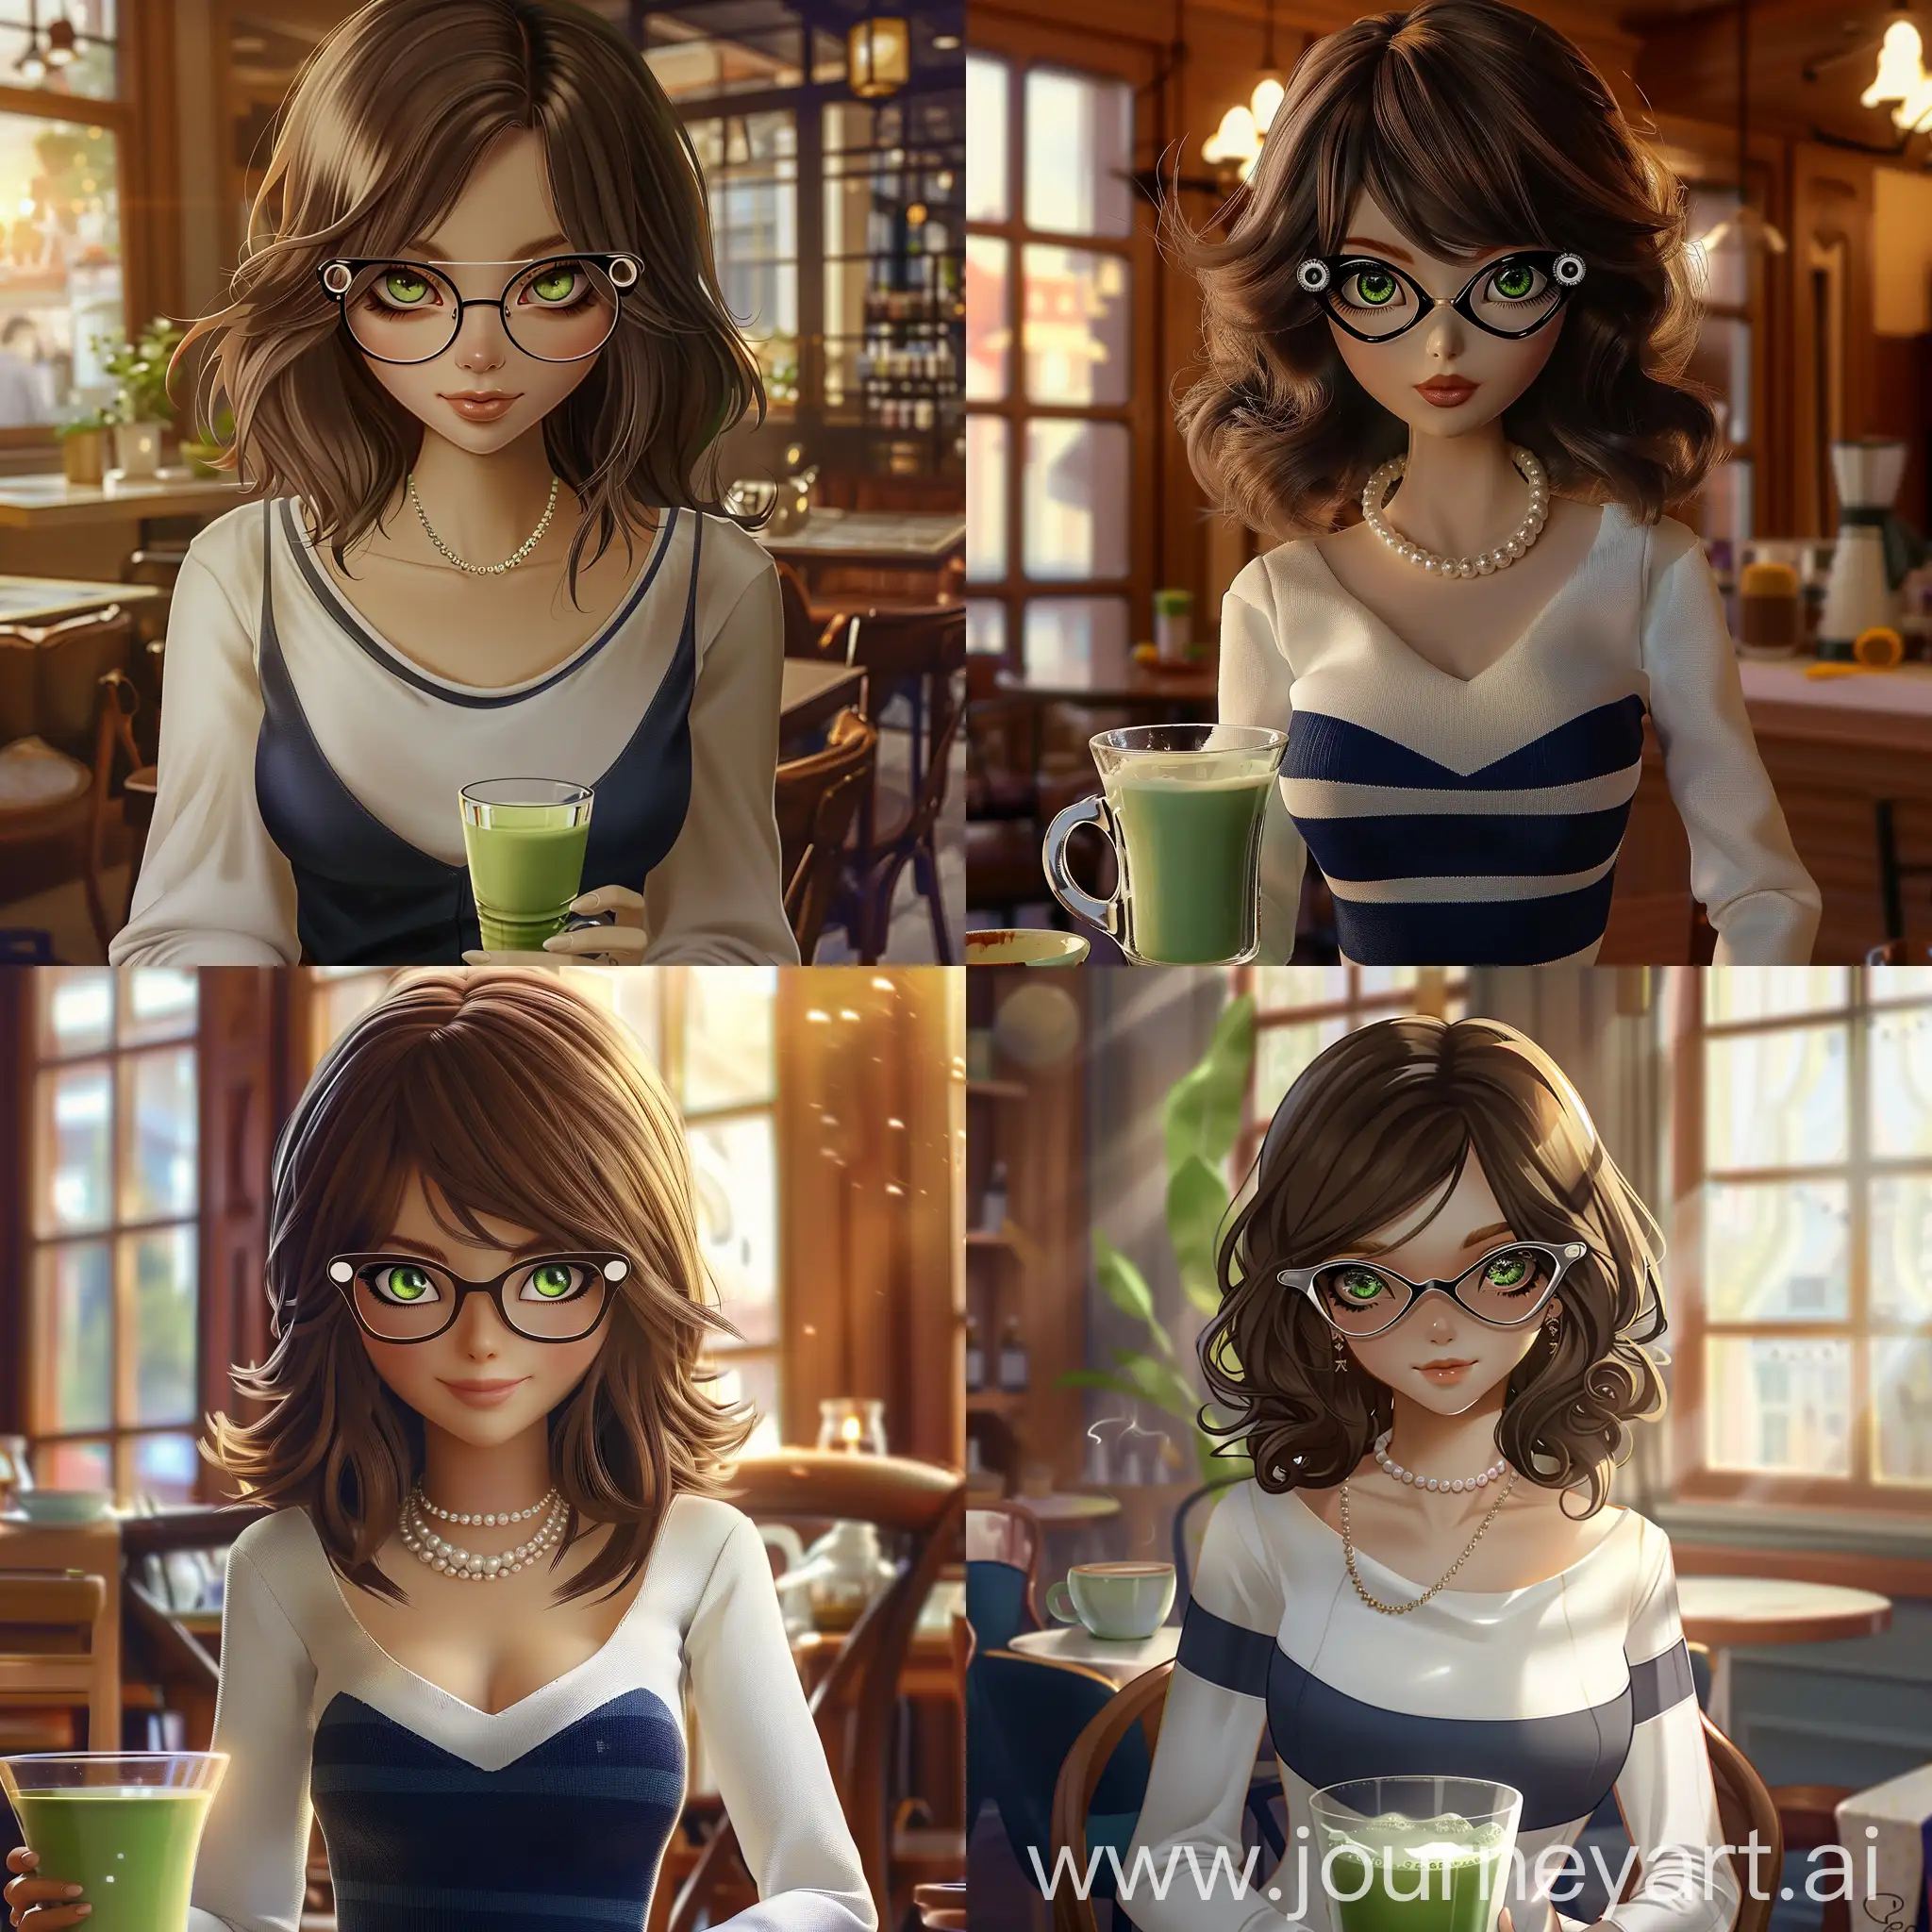 An image in the style of a Bratz doll, a girl sitting in a cafe, with shoulder-length brown hair, green eyes, in a white longsleeve with a dark blue horizontal stripe, with a wide neckline, with a pearl necklace around her neck, wearing cat's eye glasses, holding a glass of matcha latte